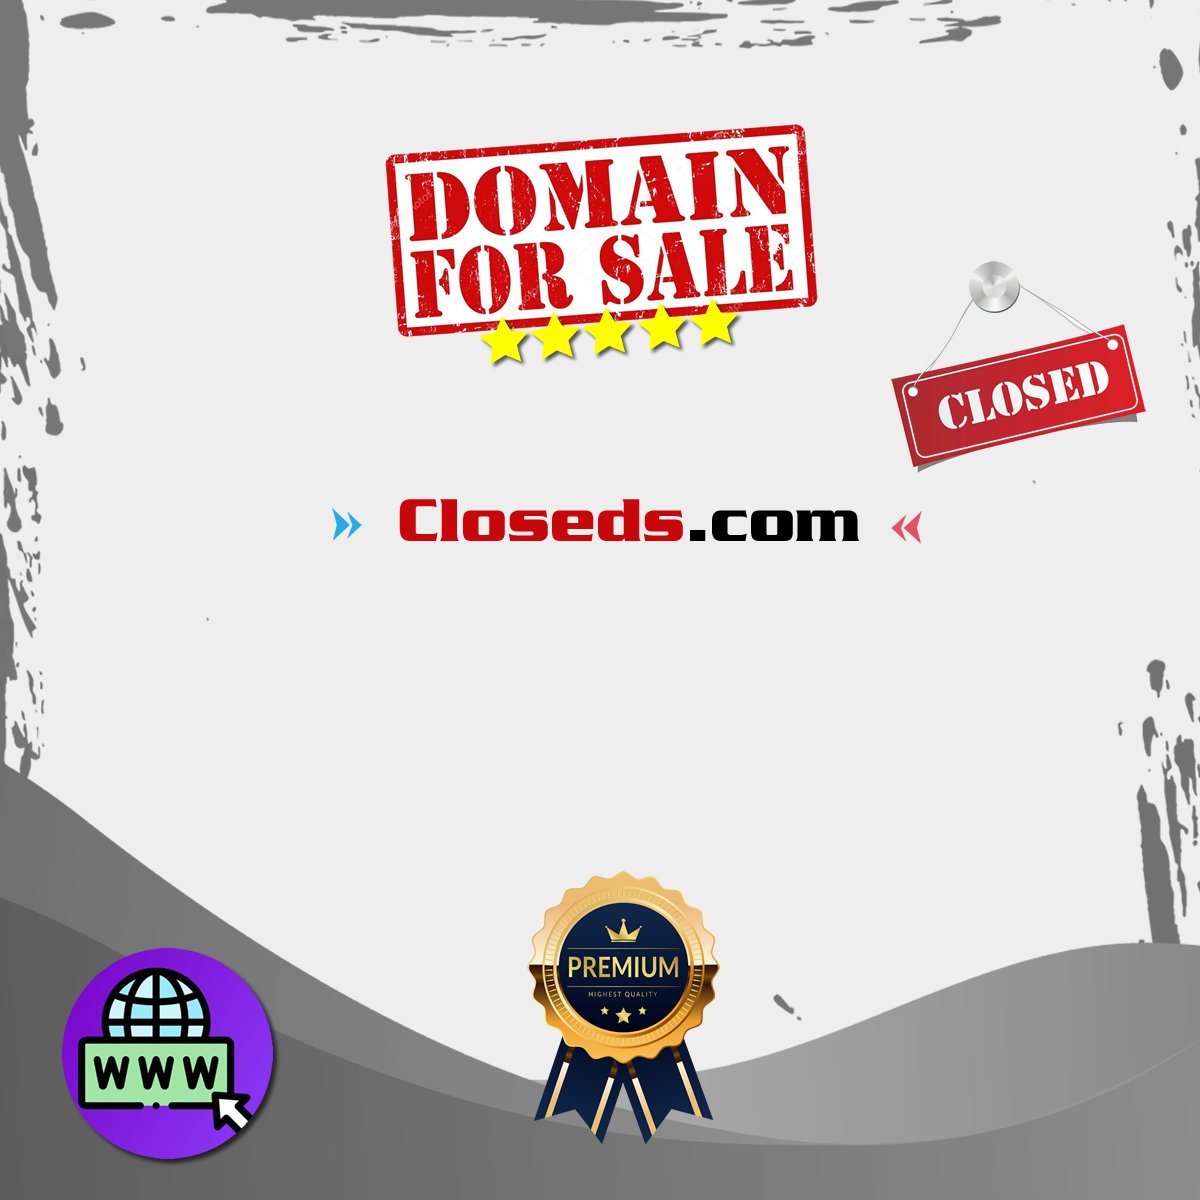 Domain for sale

#Domains #Domainnames #DomainForSale #Domain #Tools #domainers #DomainInvesting #DomainCommunity #BigWin #closed #domainname #domaining #StartupOpportunity #closeds #Seed #Funding #Startup #Founde #fechar